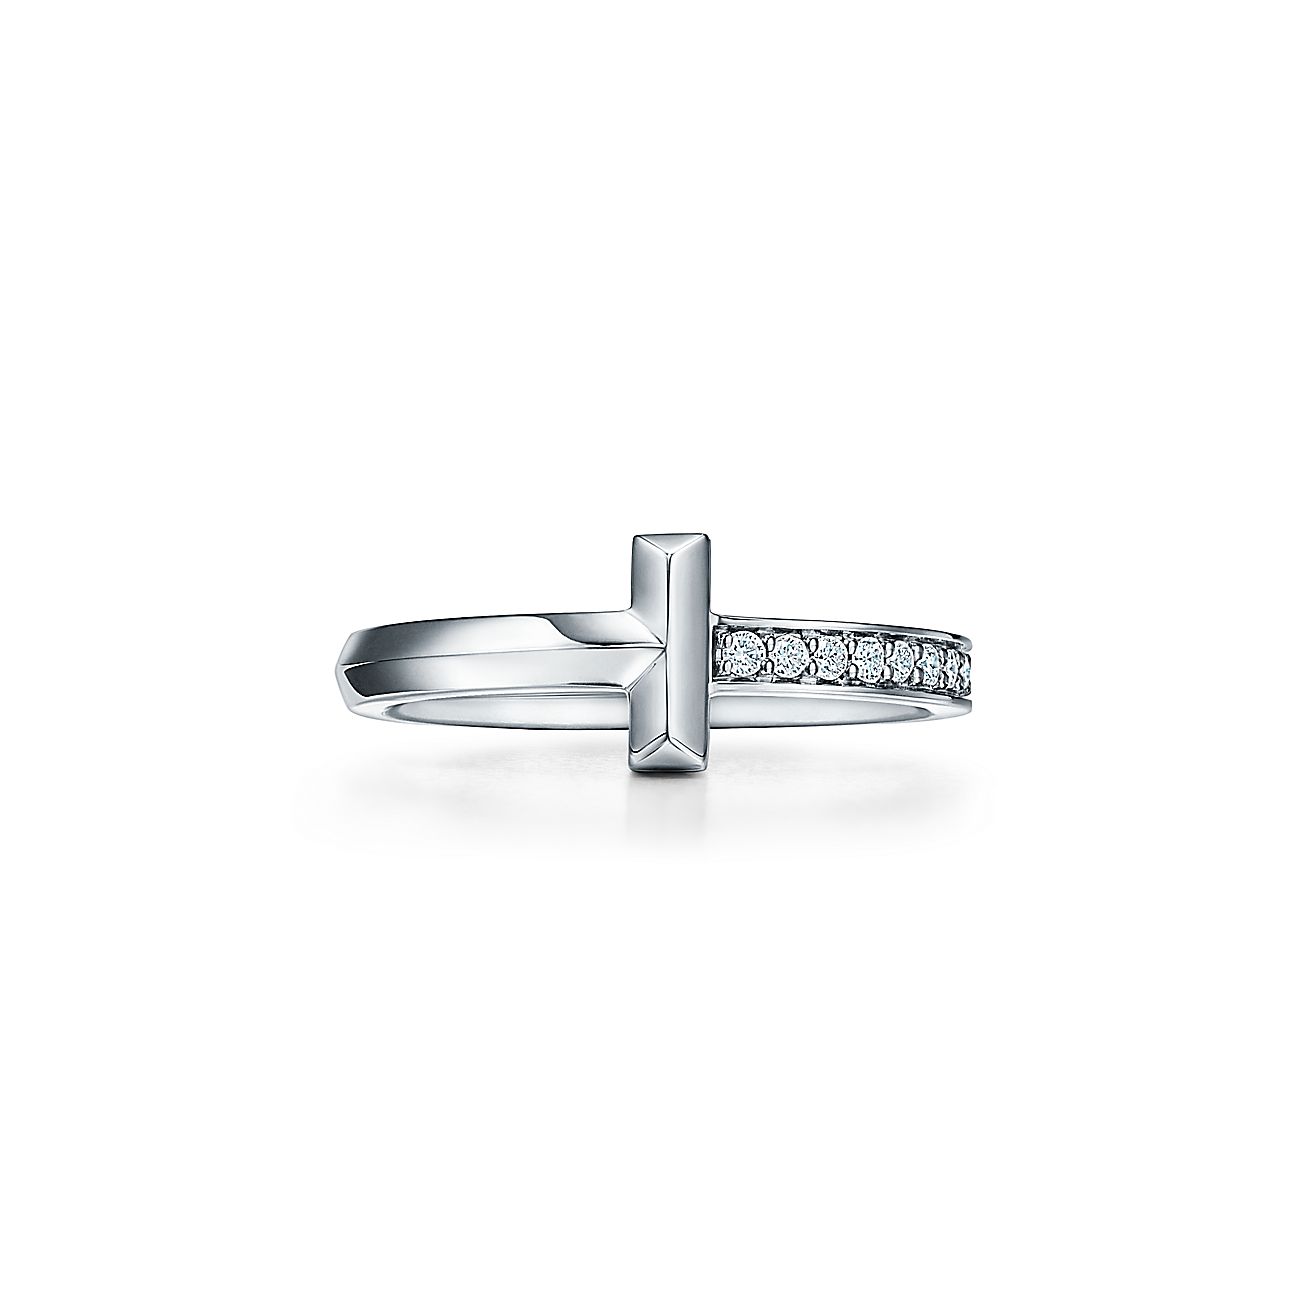 Tiffany T T1 Ring in 18k Gold with Diamonds, 2.5 mm